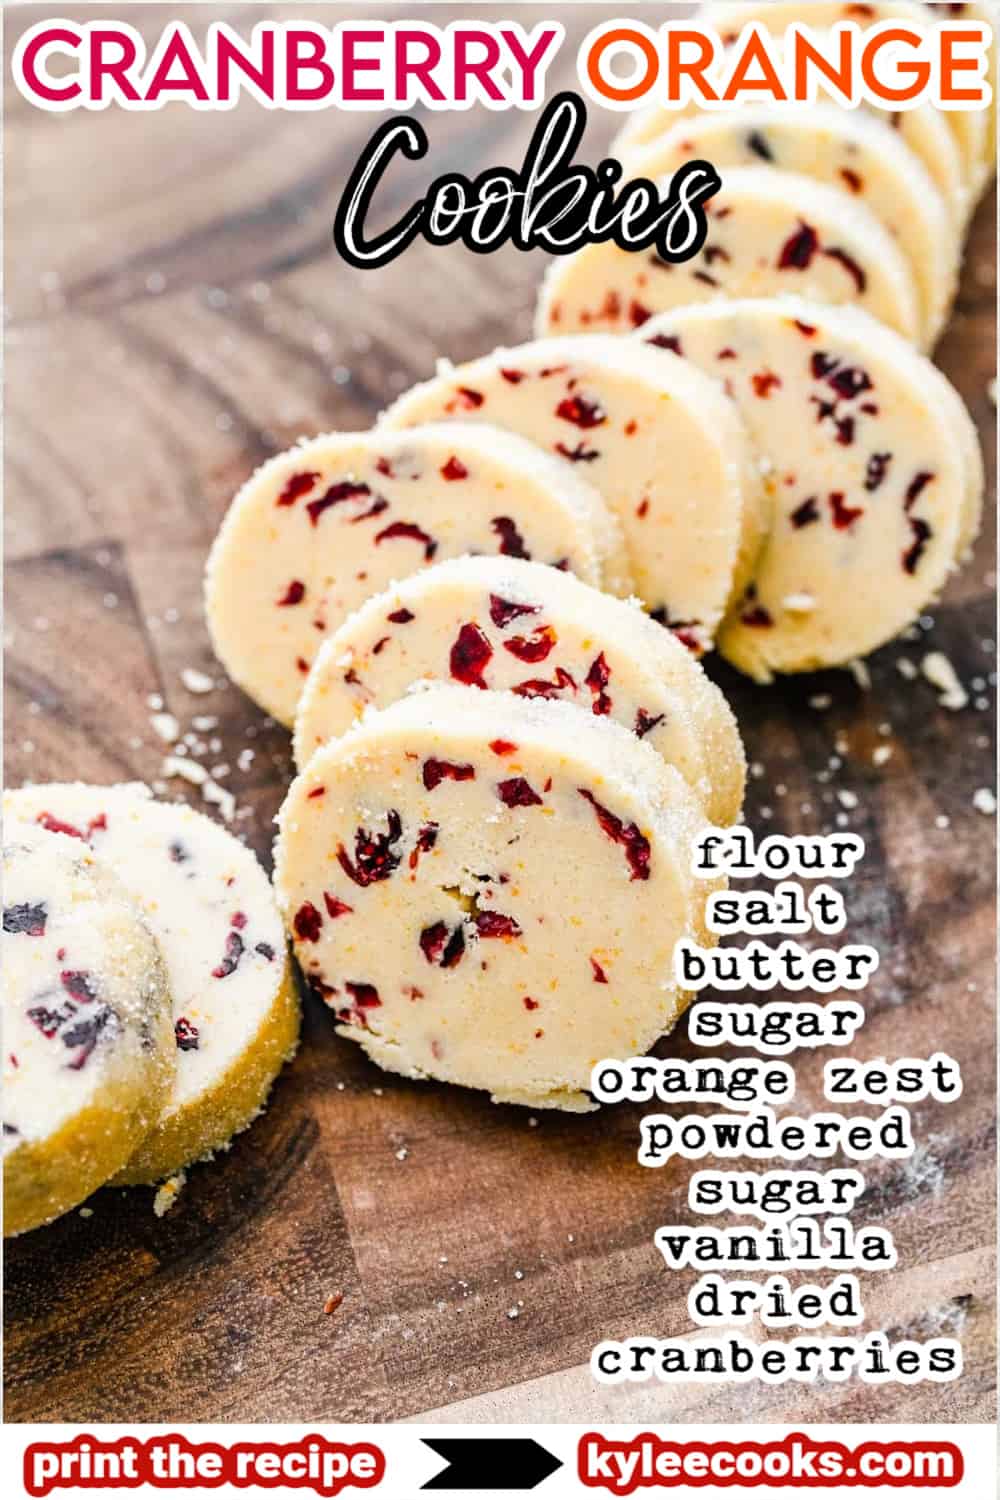 cranberry orange cookies with recipe name overlaid in text.